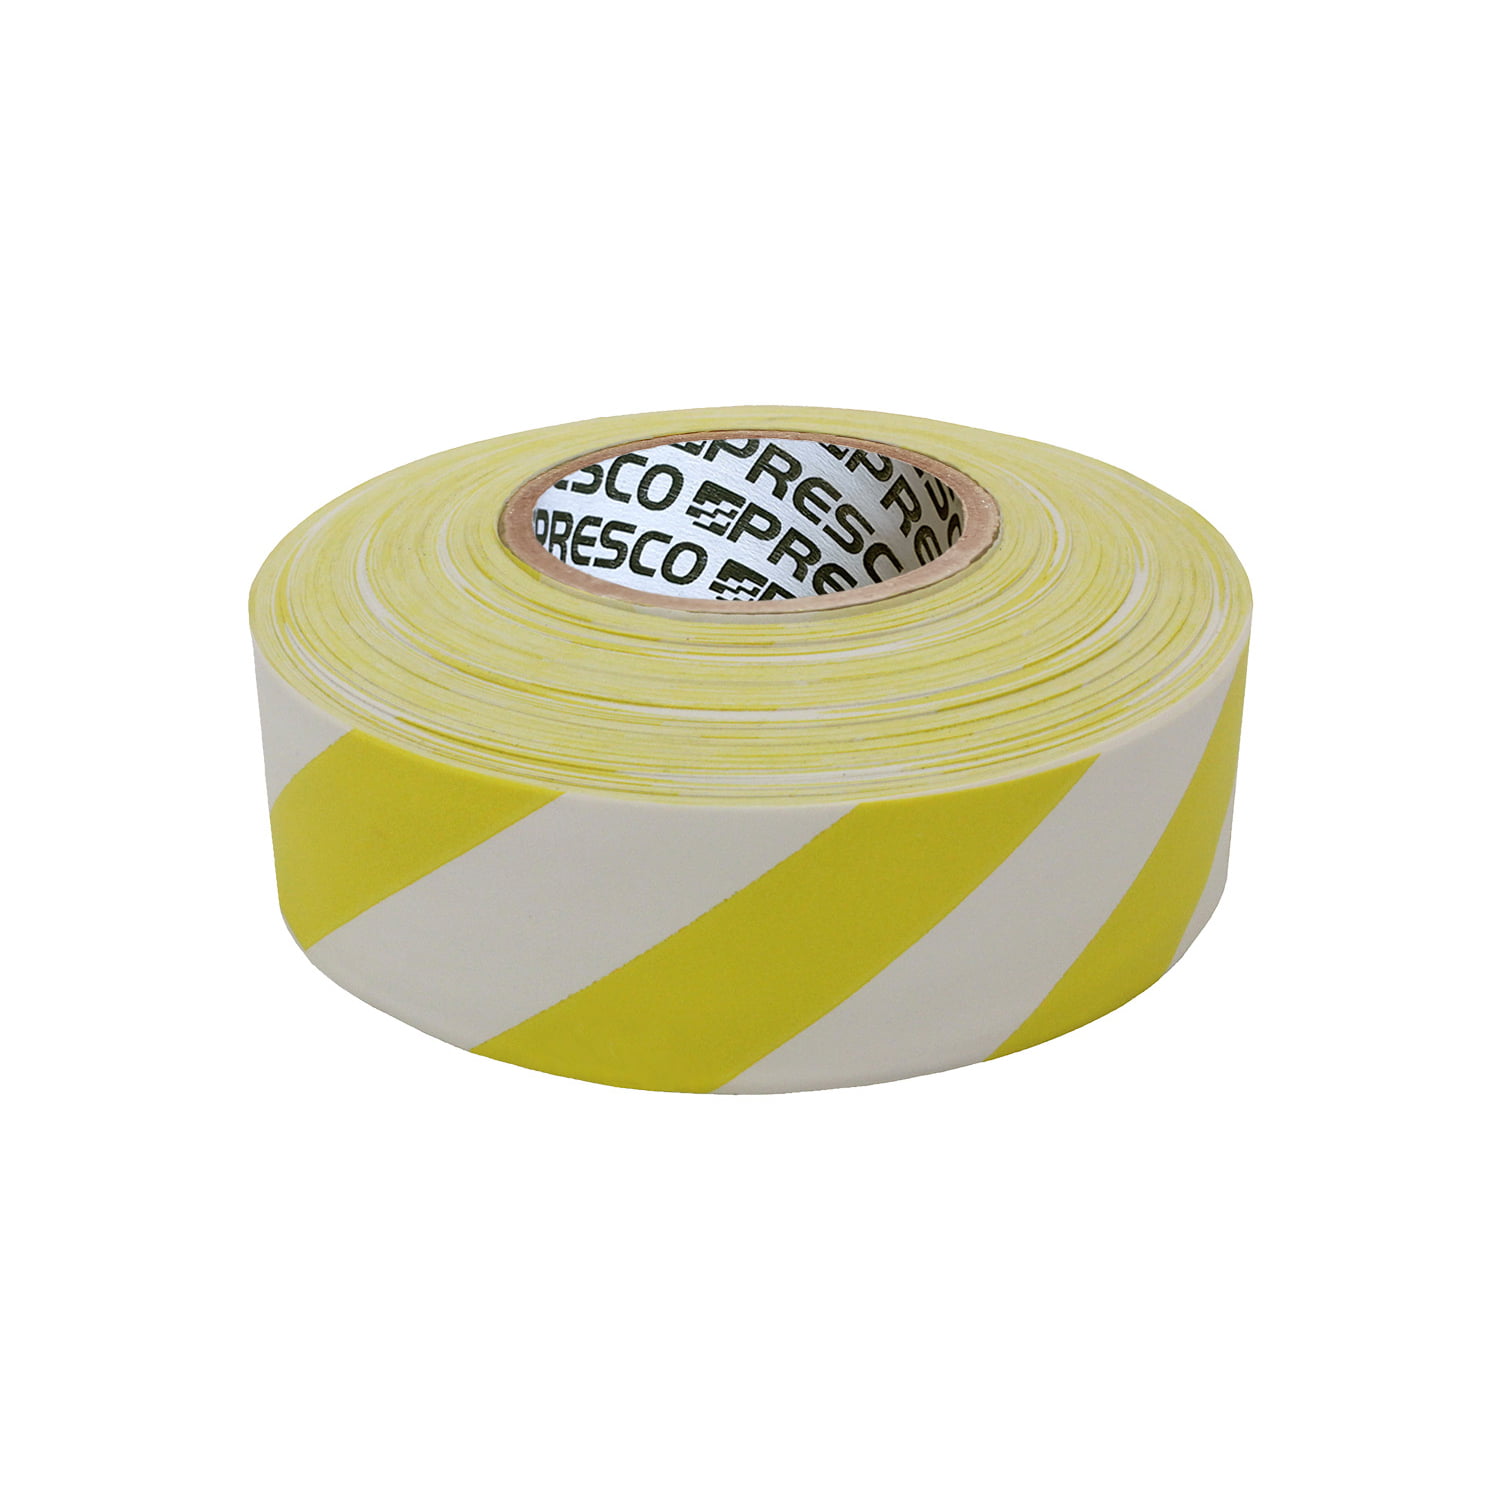 Black Flagging Tape 1 3/16" x 300 ft Roll Non-Adhesive 